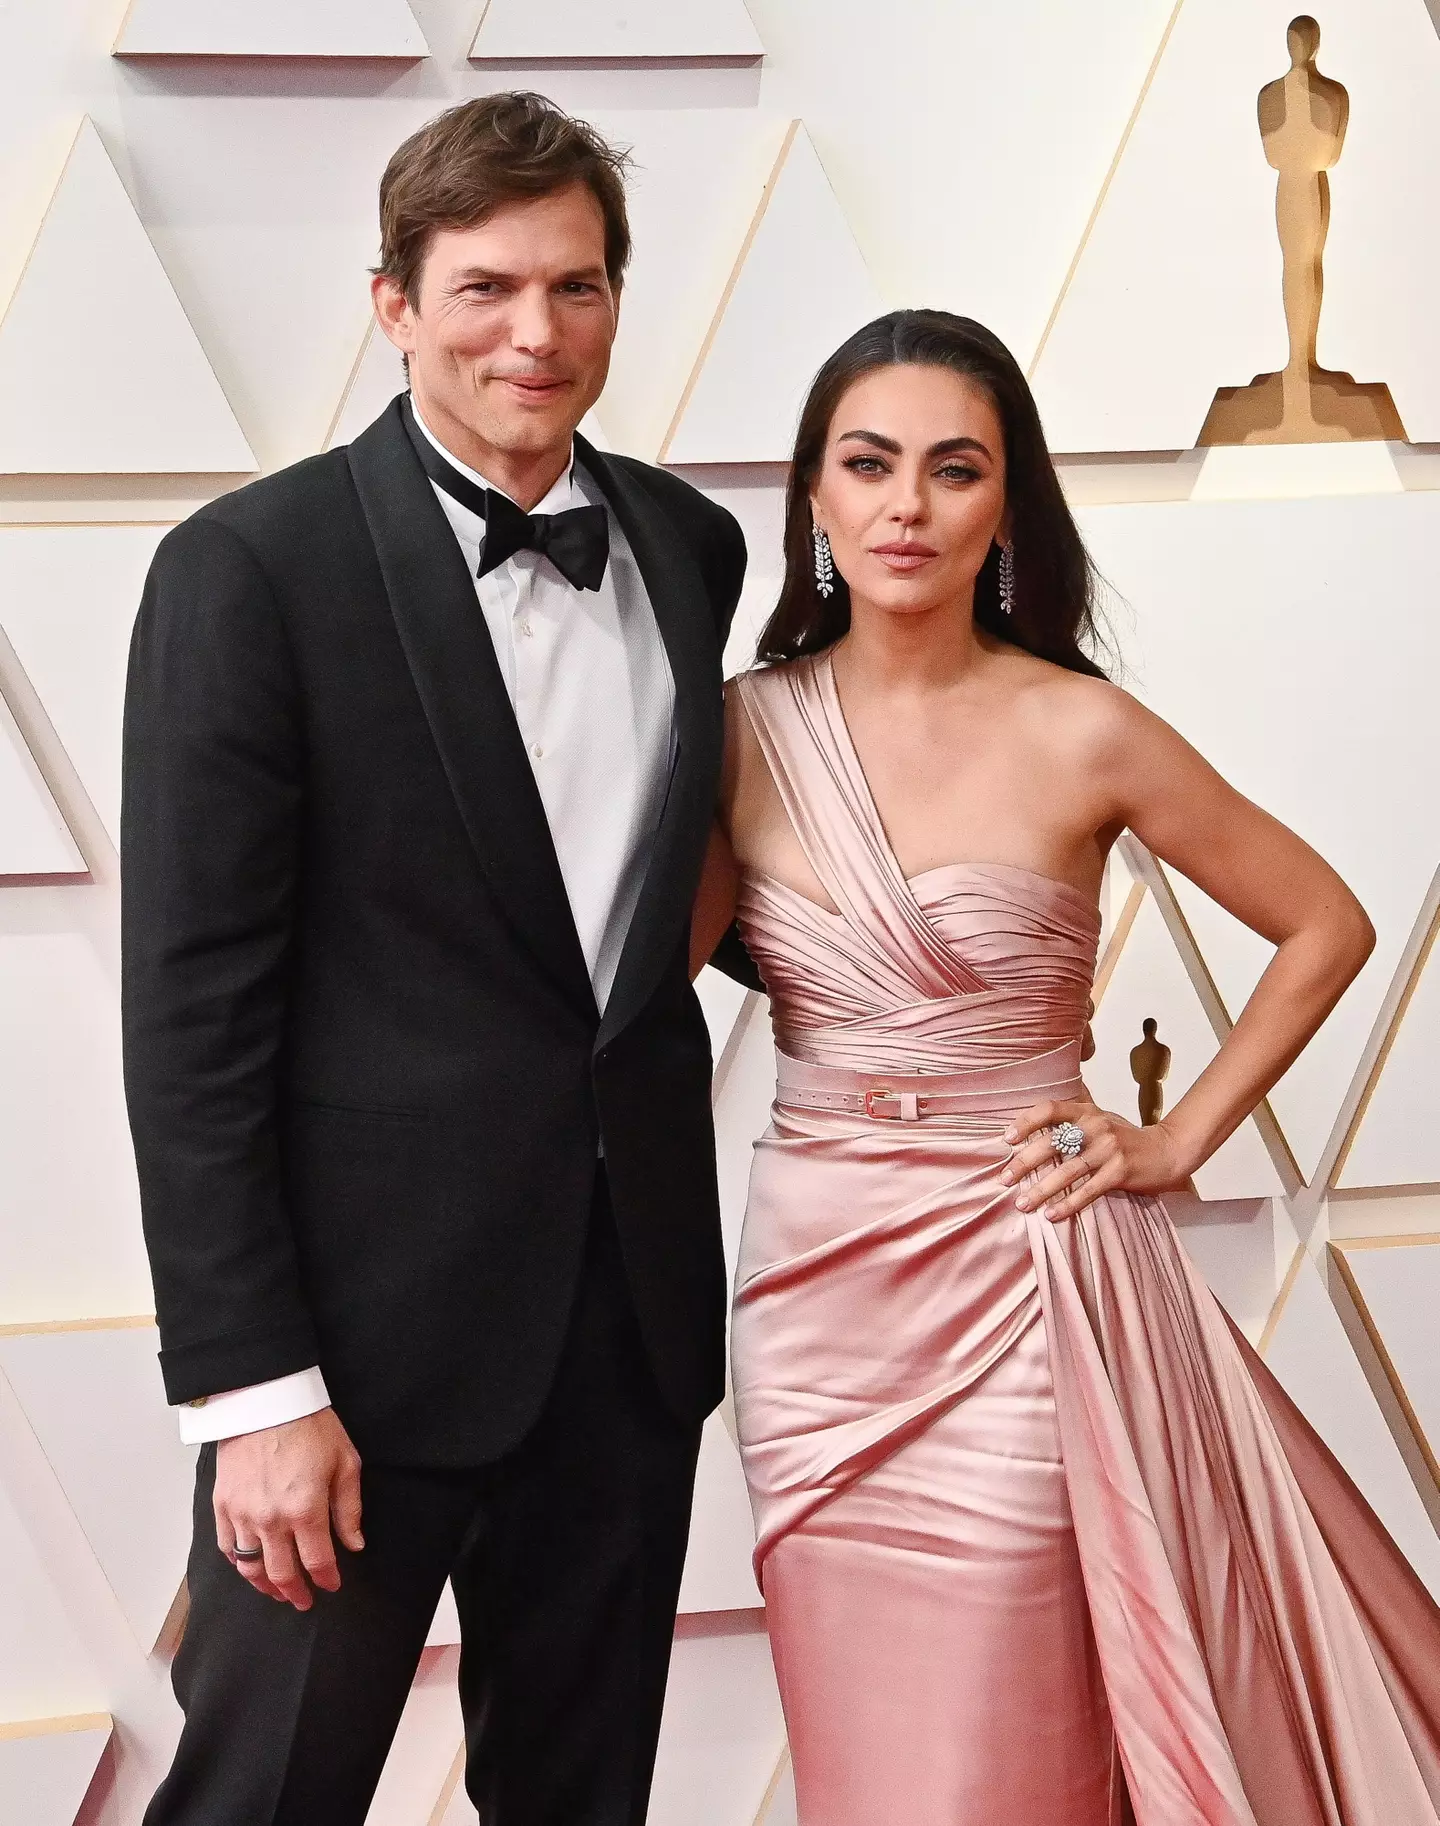 Ashton Kutcher with his wife Mila Kunis at the 94th Academy Awards.